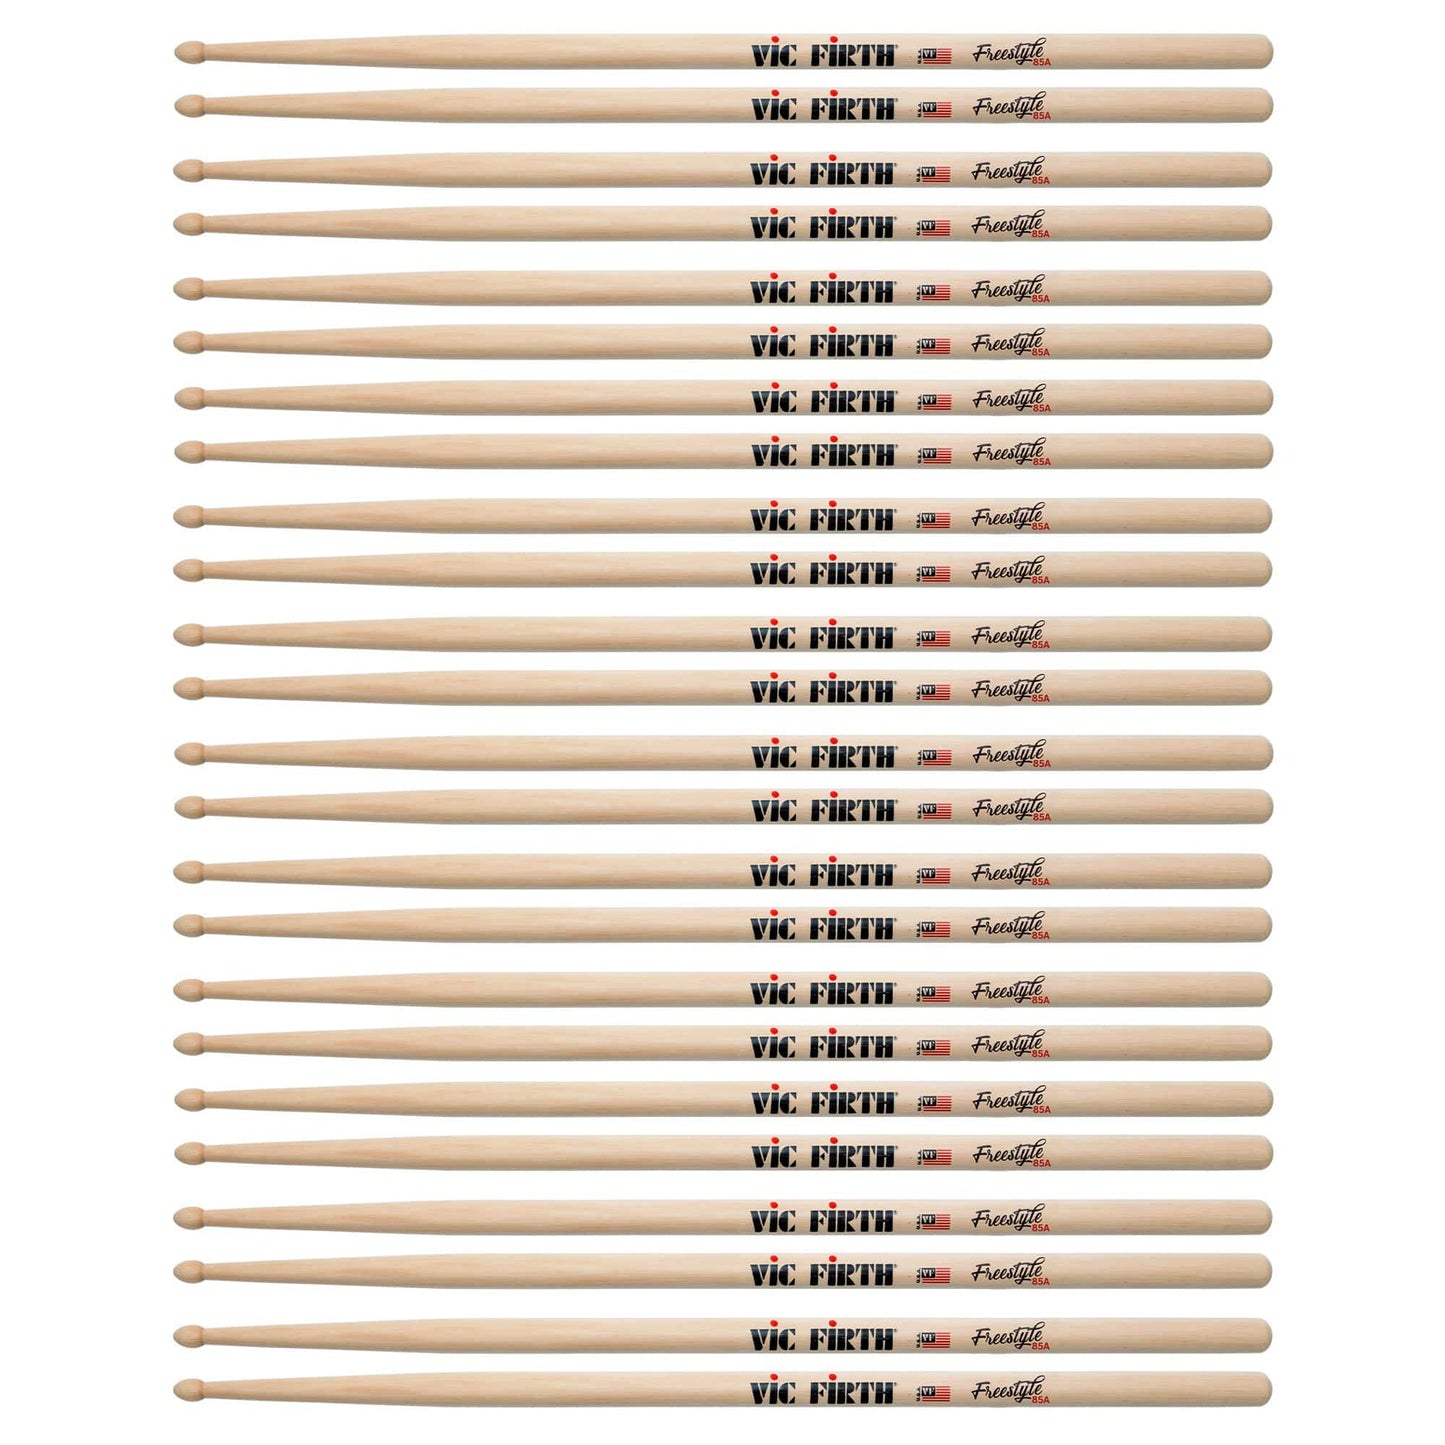 Vic Firth American Concept Freestyle 85A Wood Tip Drum Sticks (12 Pair Bundle) Drums and Percussion / Parts and Accessories / Drum Sticks and Mallets